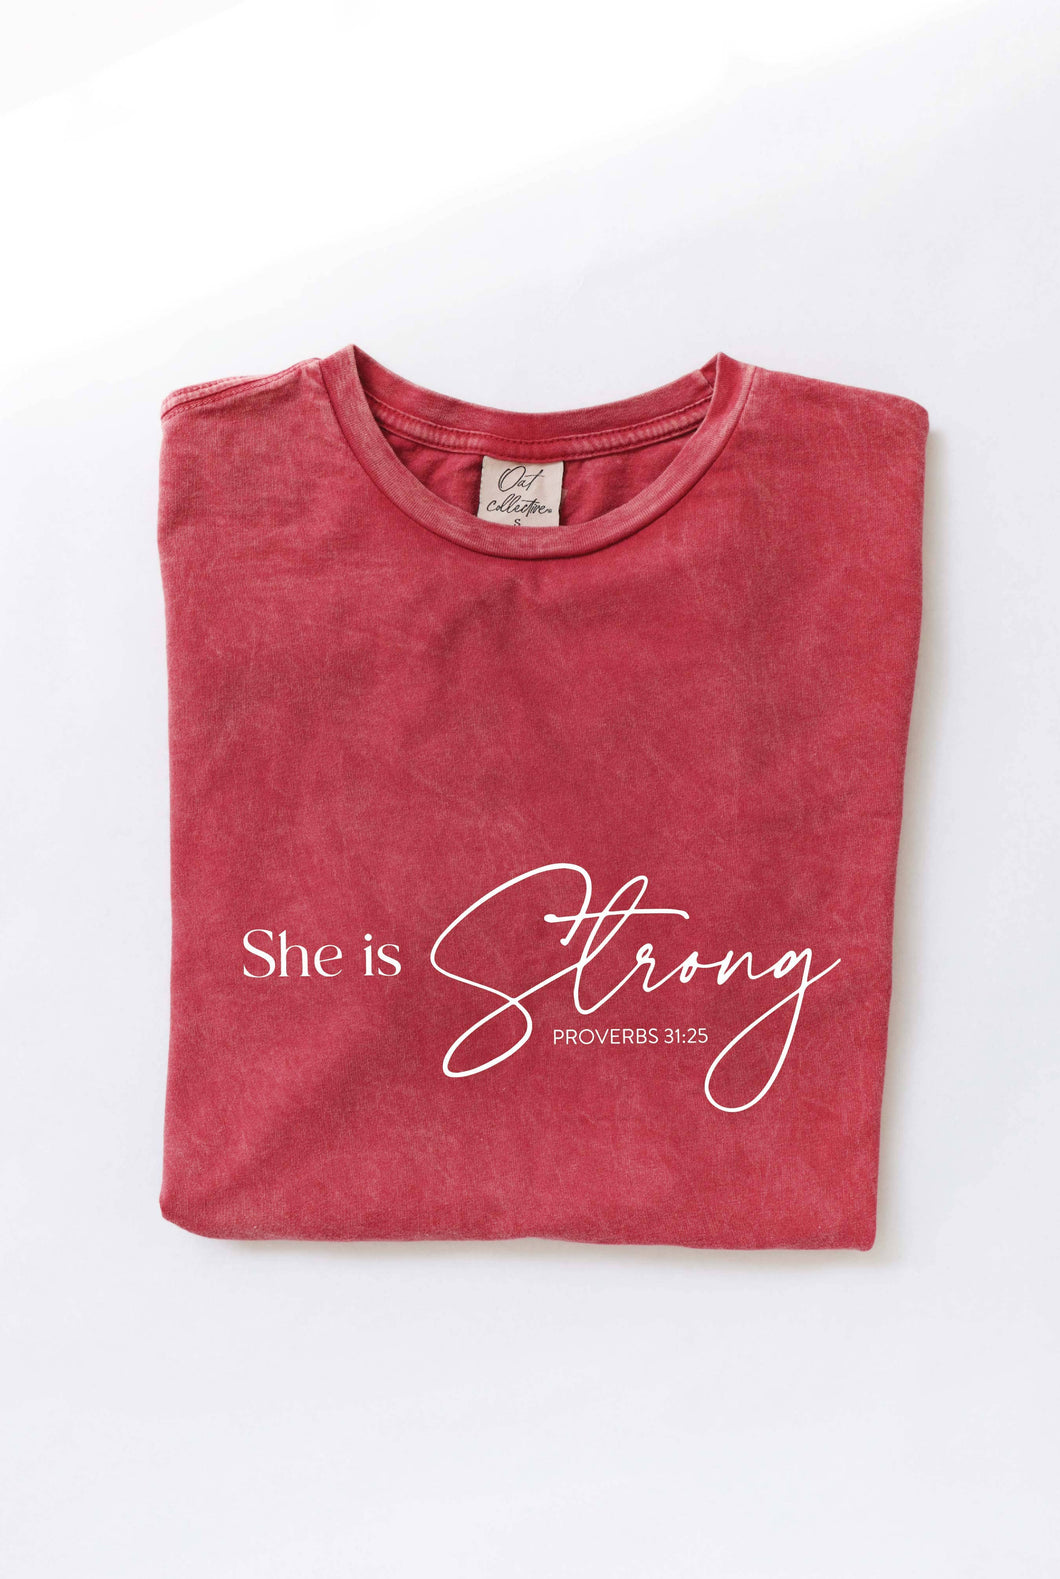 SHE IS STRONG PROVERBS 31:25 Mineral Washed Graphic Top